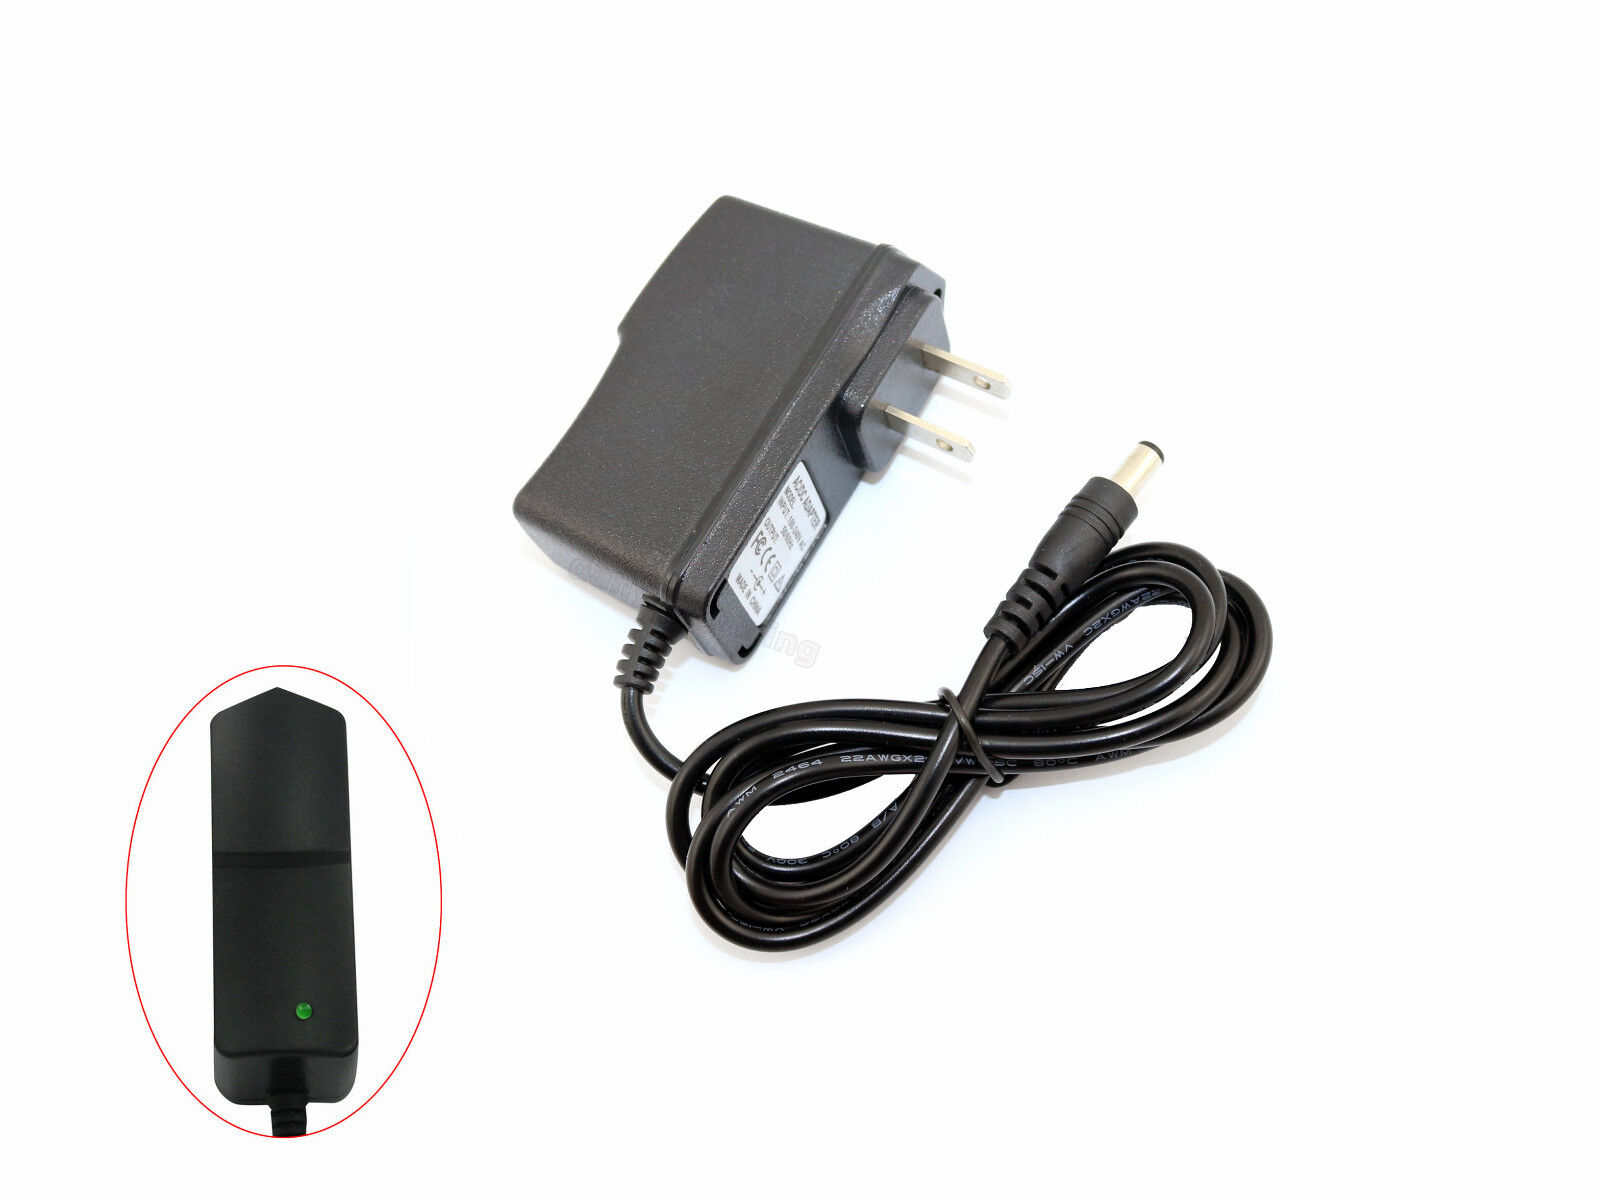 100-240V US AC to DC 9V 300mA Supply Ranking Brand new integrated 1st place Power Charger 0.3A Converte